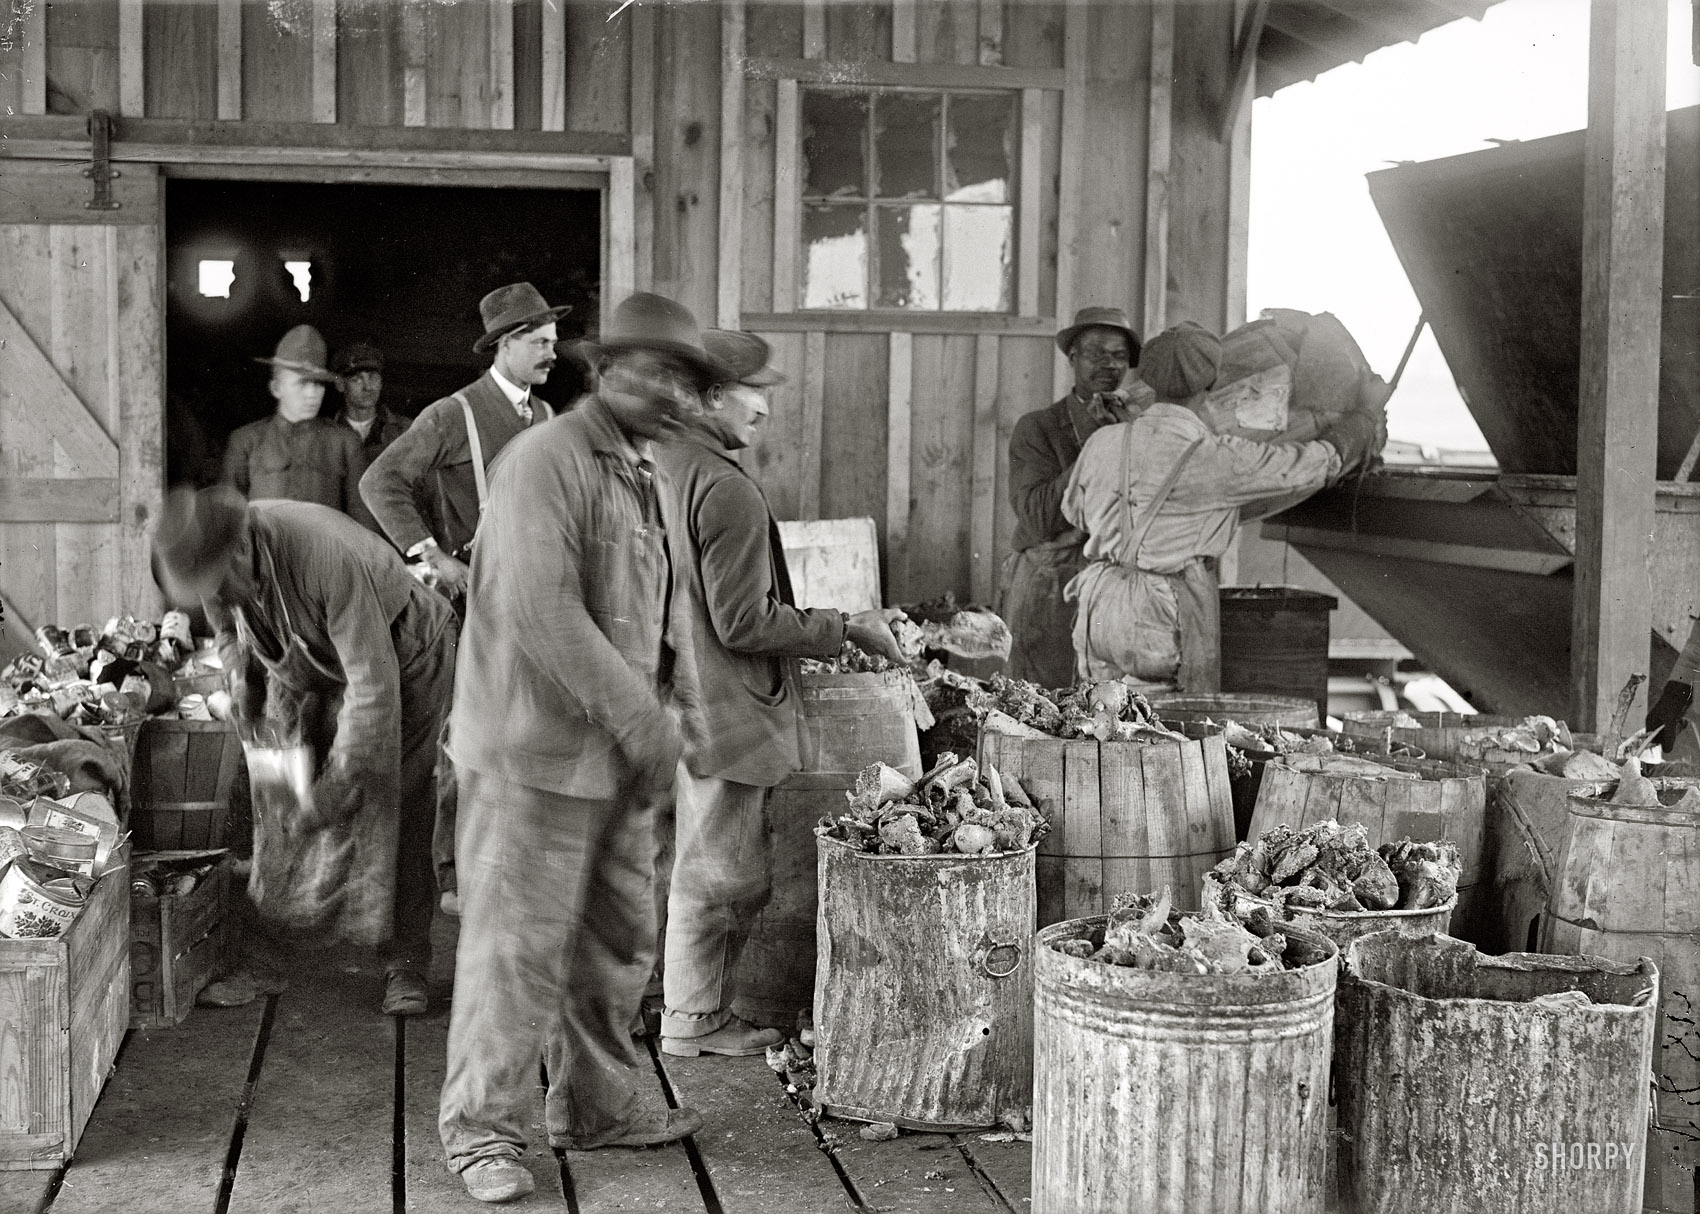 1917. "Camp Meade, Maryland. Miscellaneous views." Ashcans and garbage at the mess hall. Harris & Ewing Collection glass negative. View full size.